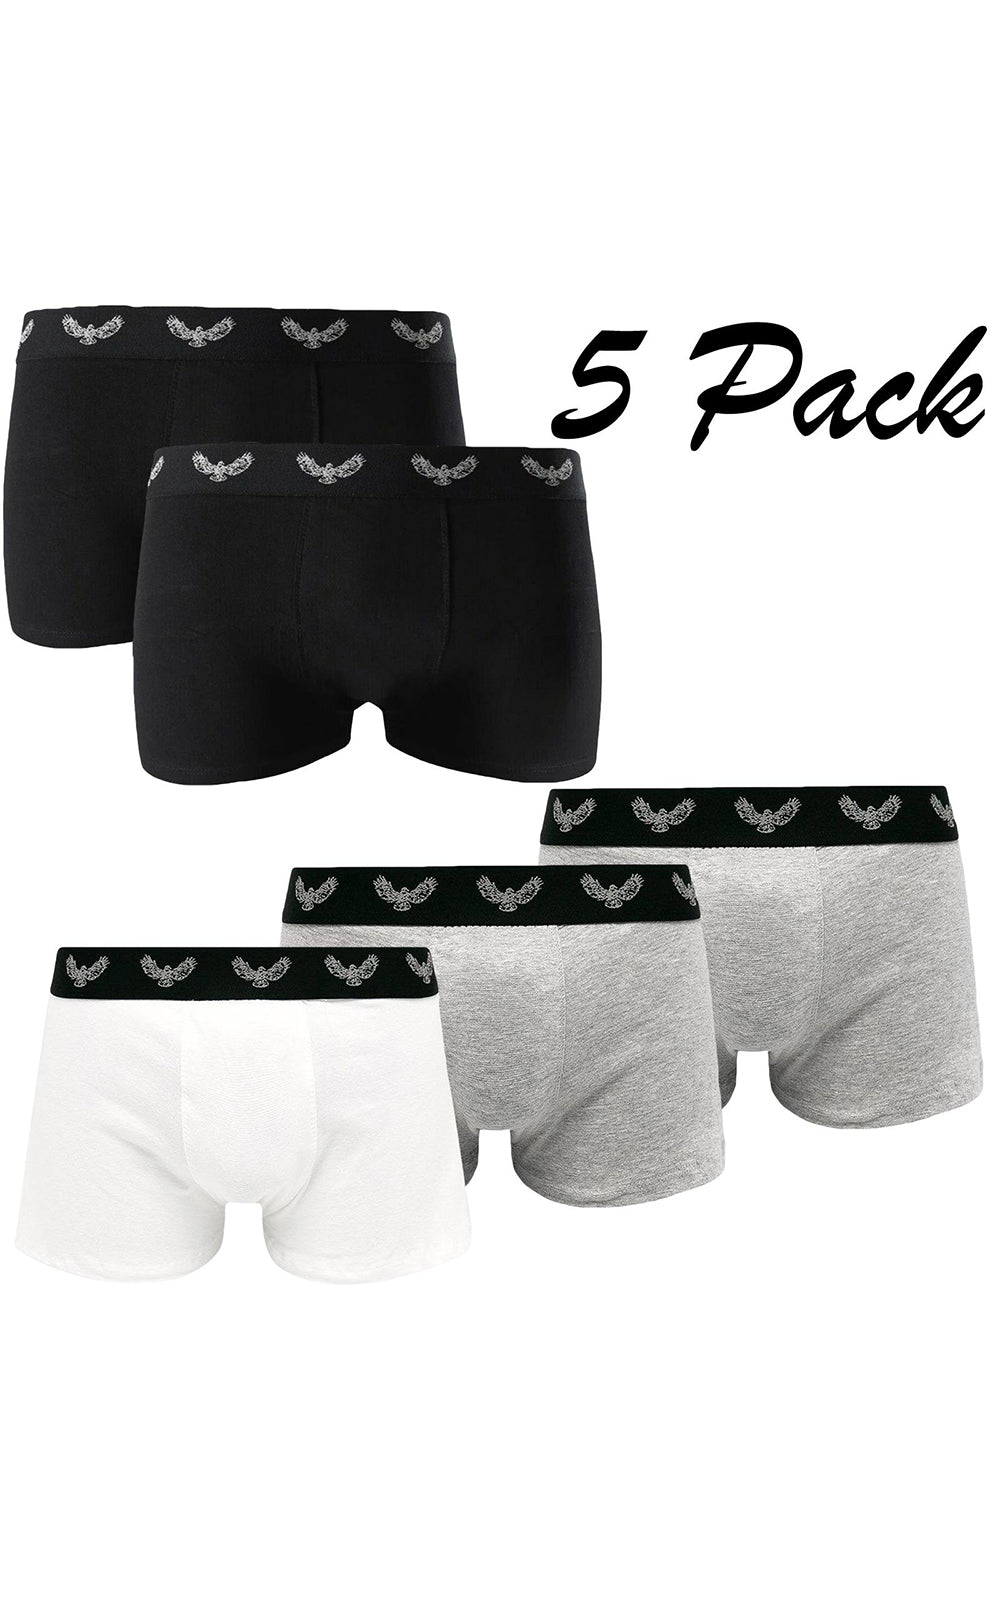 Brave Soul 5 Pack Boxers